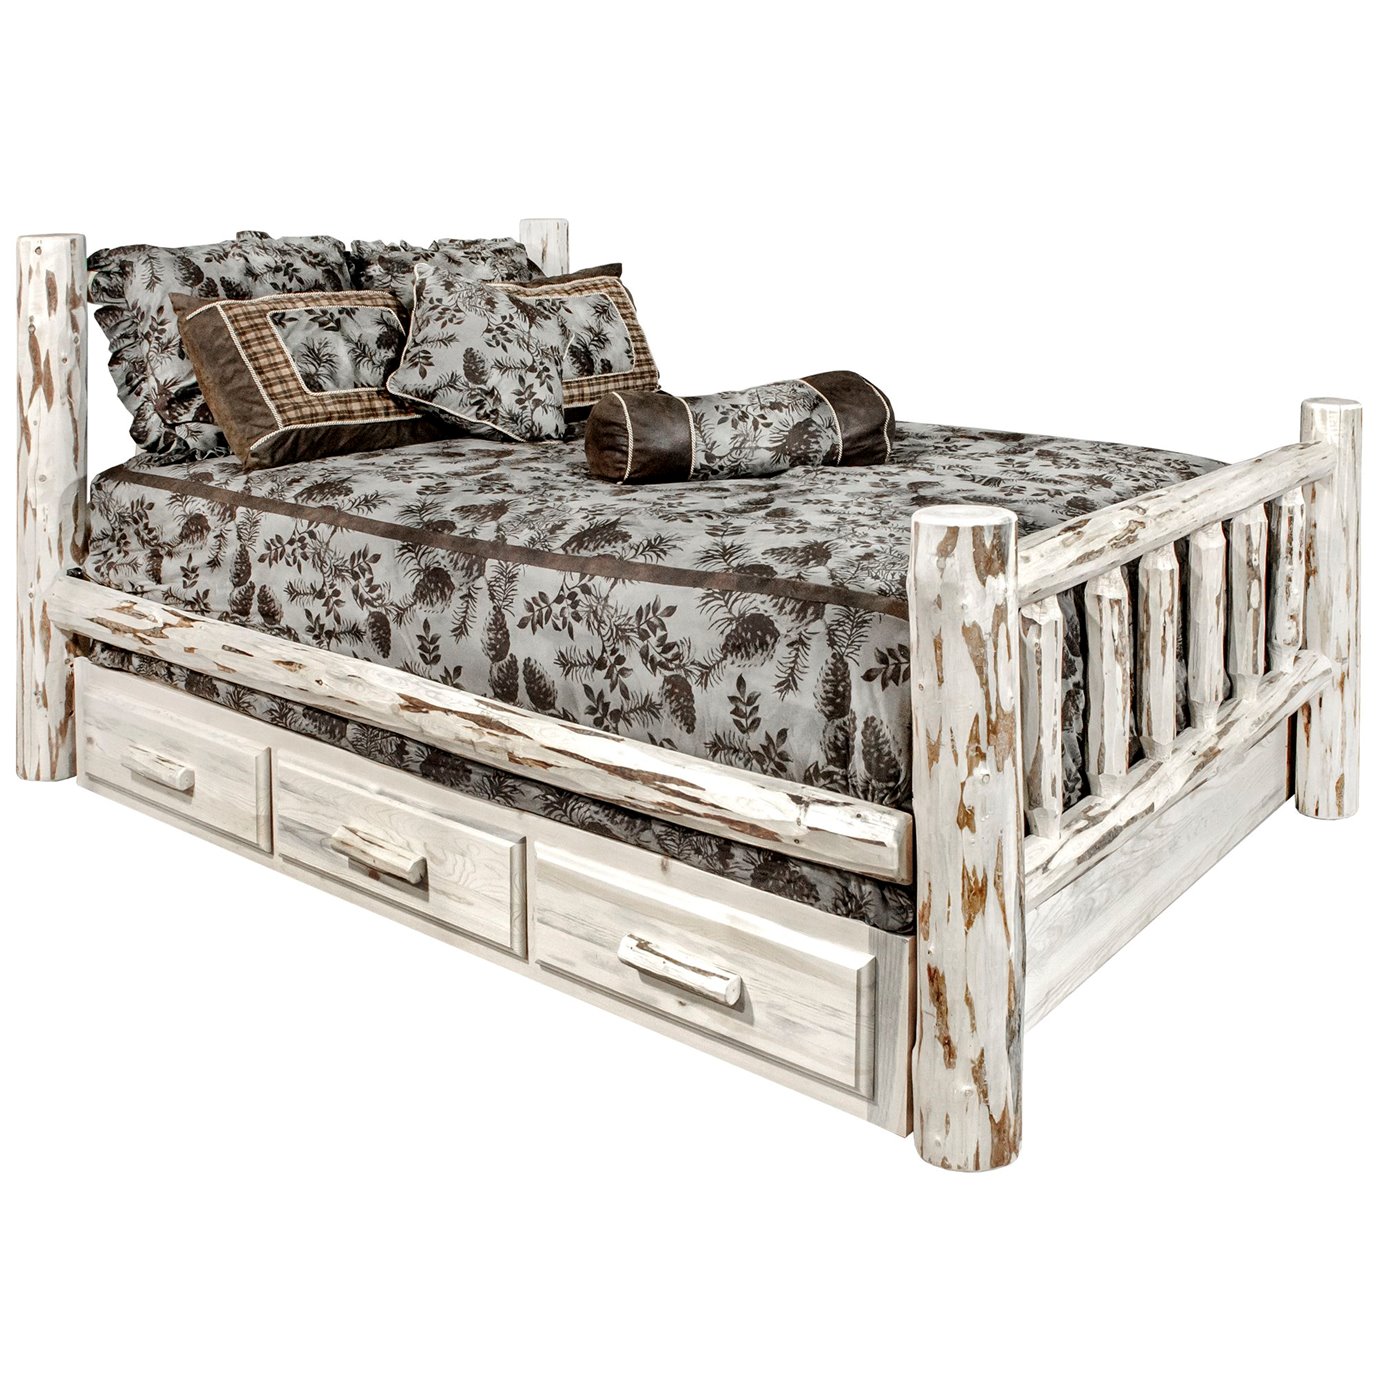 Montana Twin Bed w/ Storage - Clear Lacquer Finish